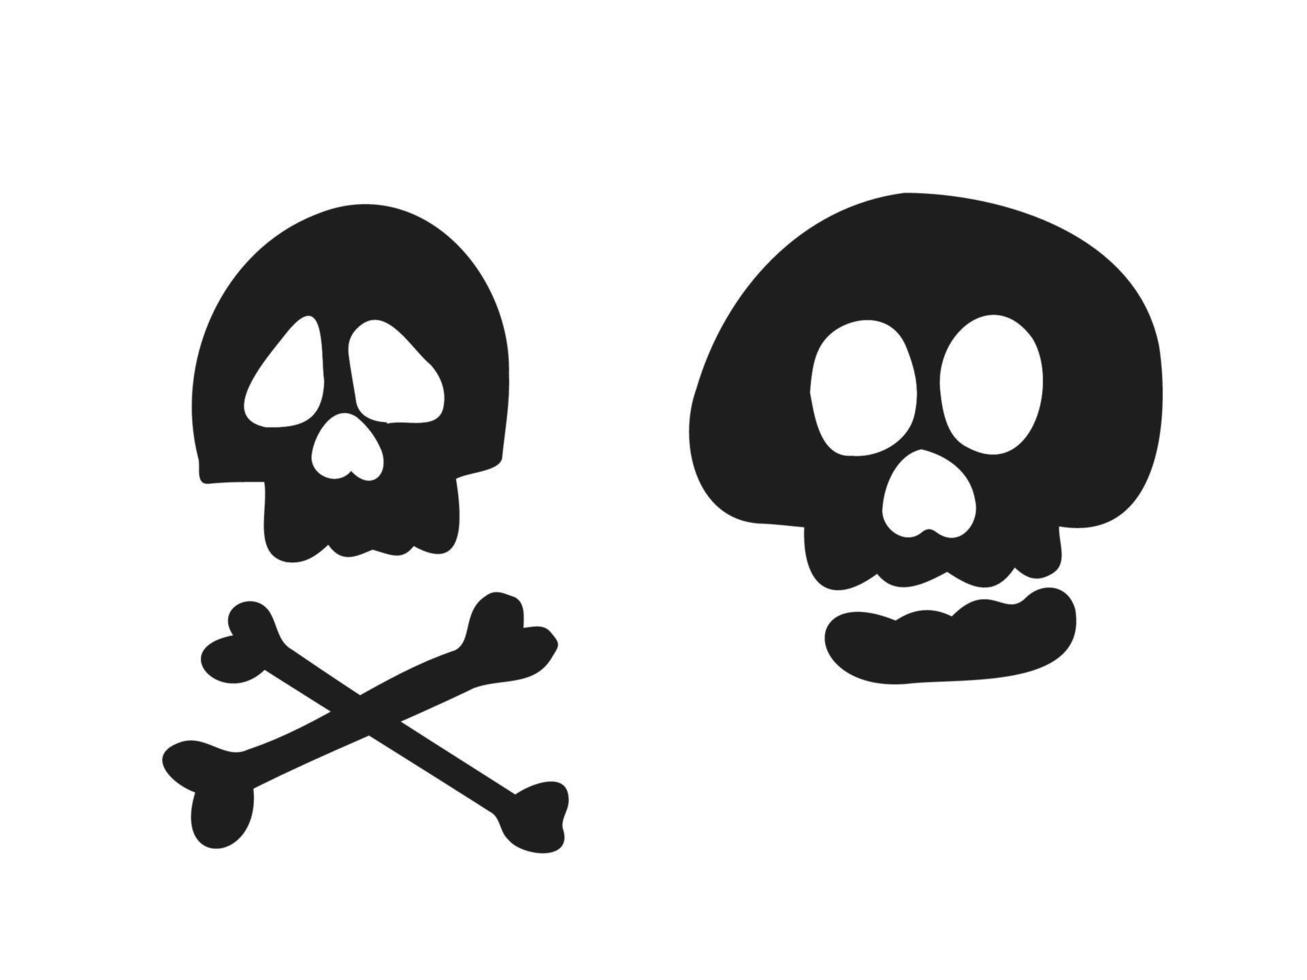 Halloween 2022 - October 31. A traditional holiday. Trick or treat. Vector illustration in hand-drawn doodle style. Set of silhouettes of human skulls.